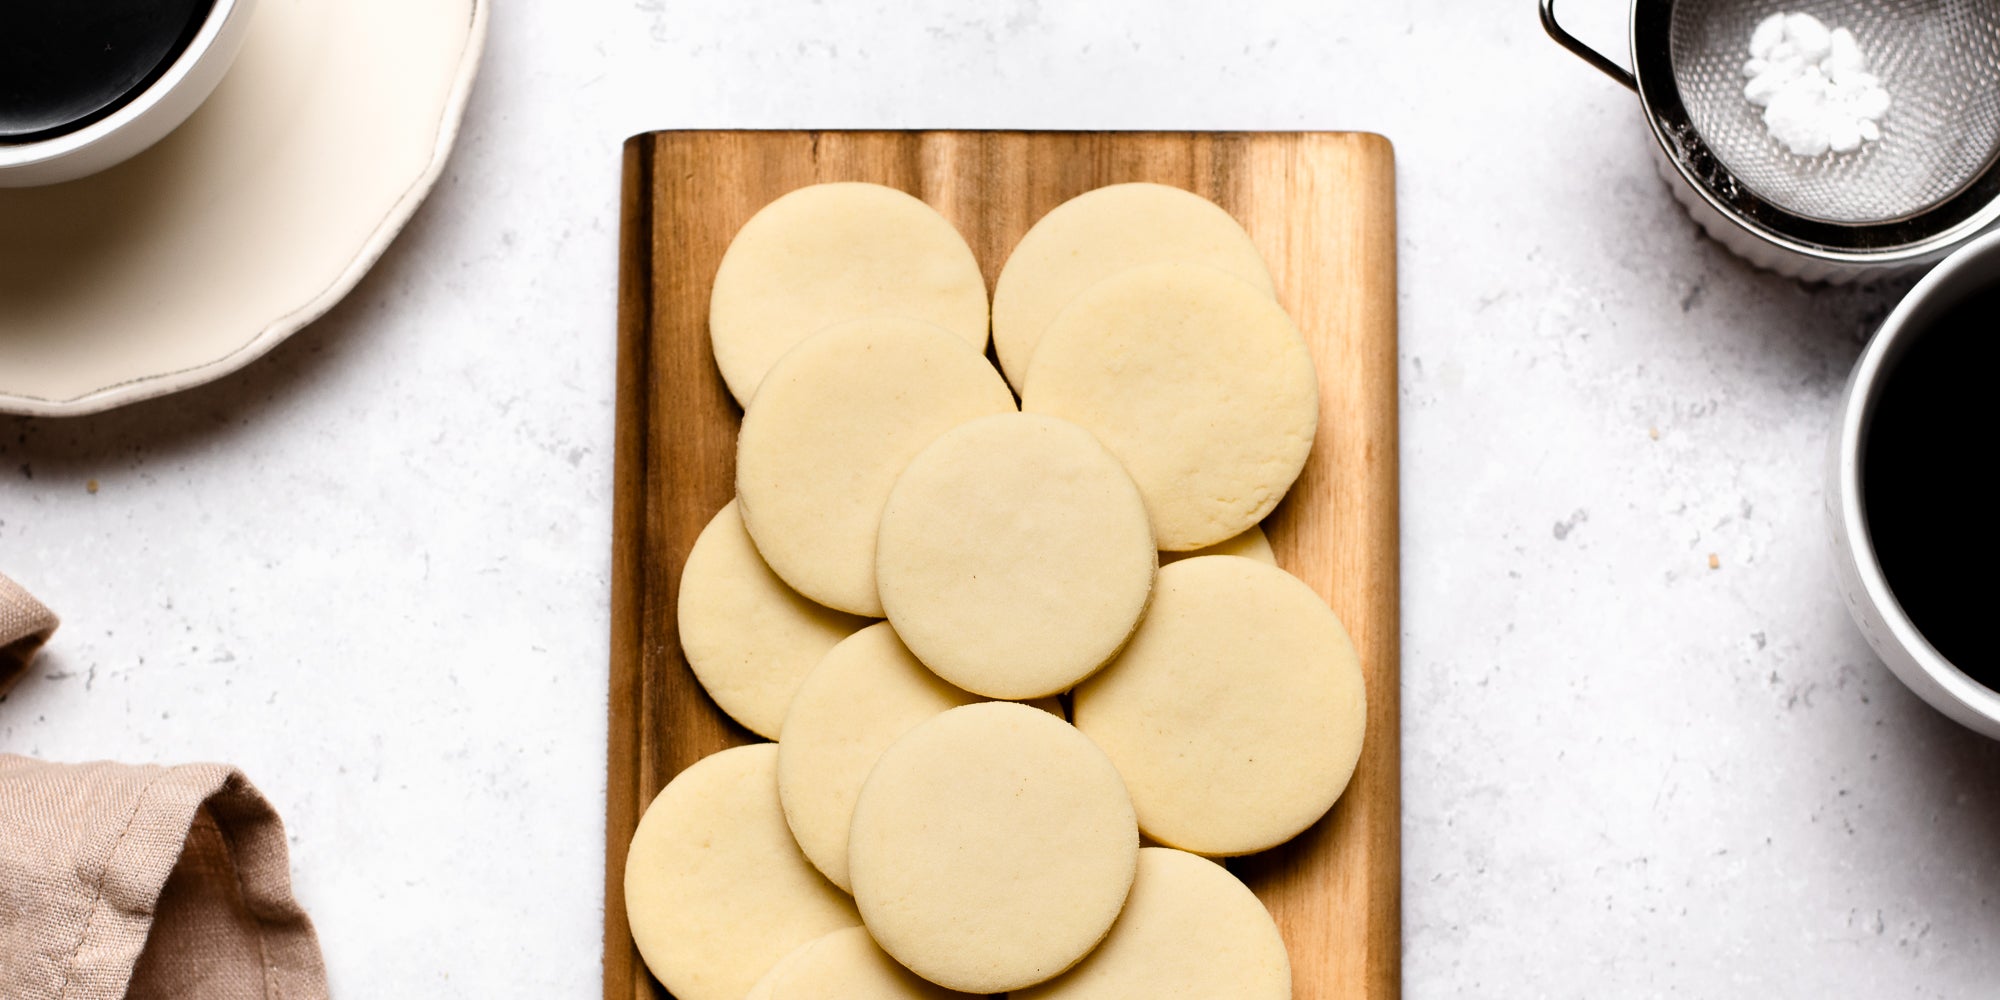 Top down view of vegan shortbread on a chopping board